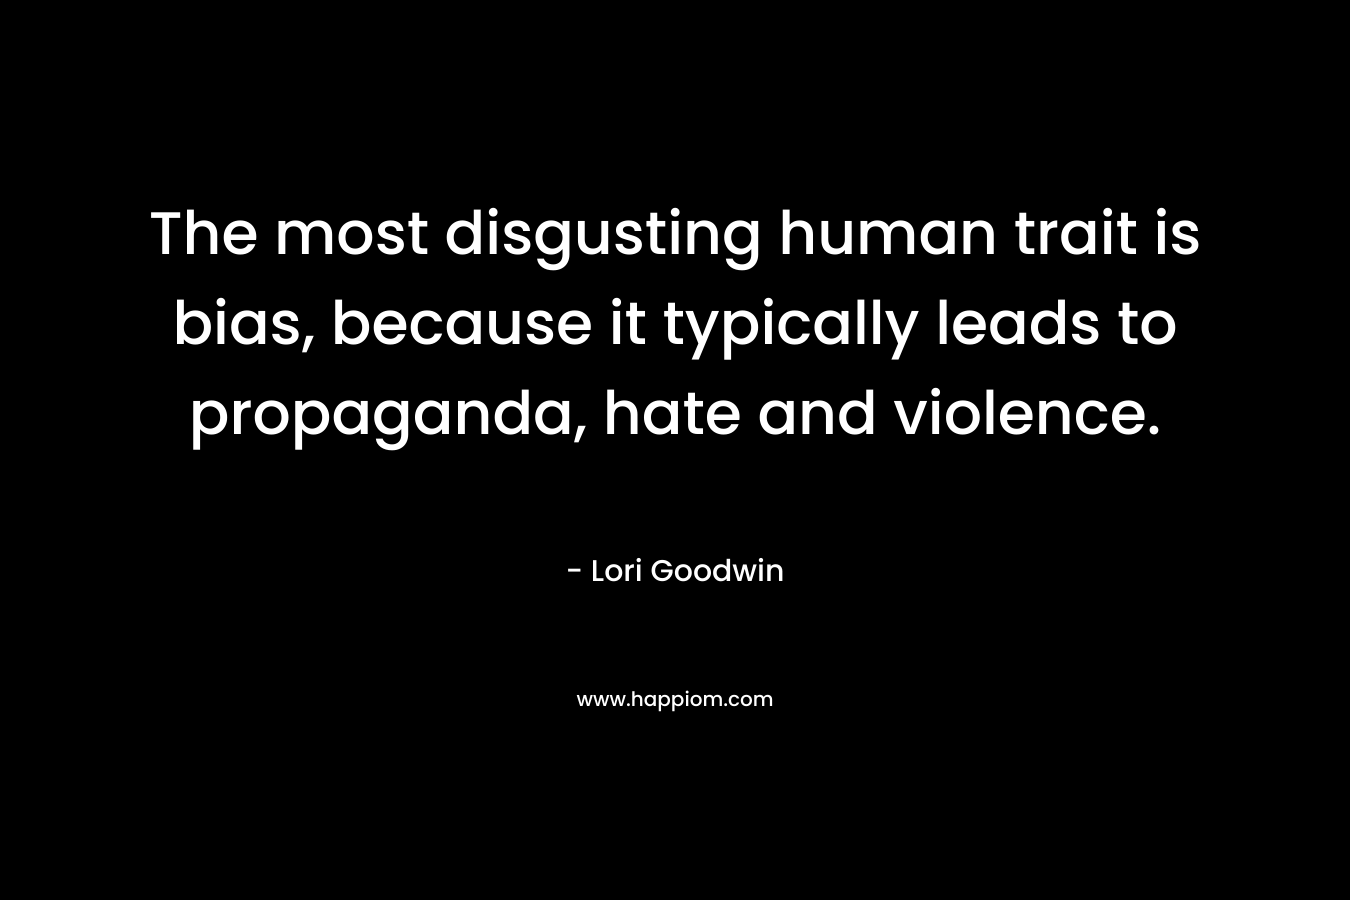 The most disgusting human trait is bias, because it typically leads to propaganda, hate and violence. – Lori Goodwin